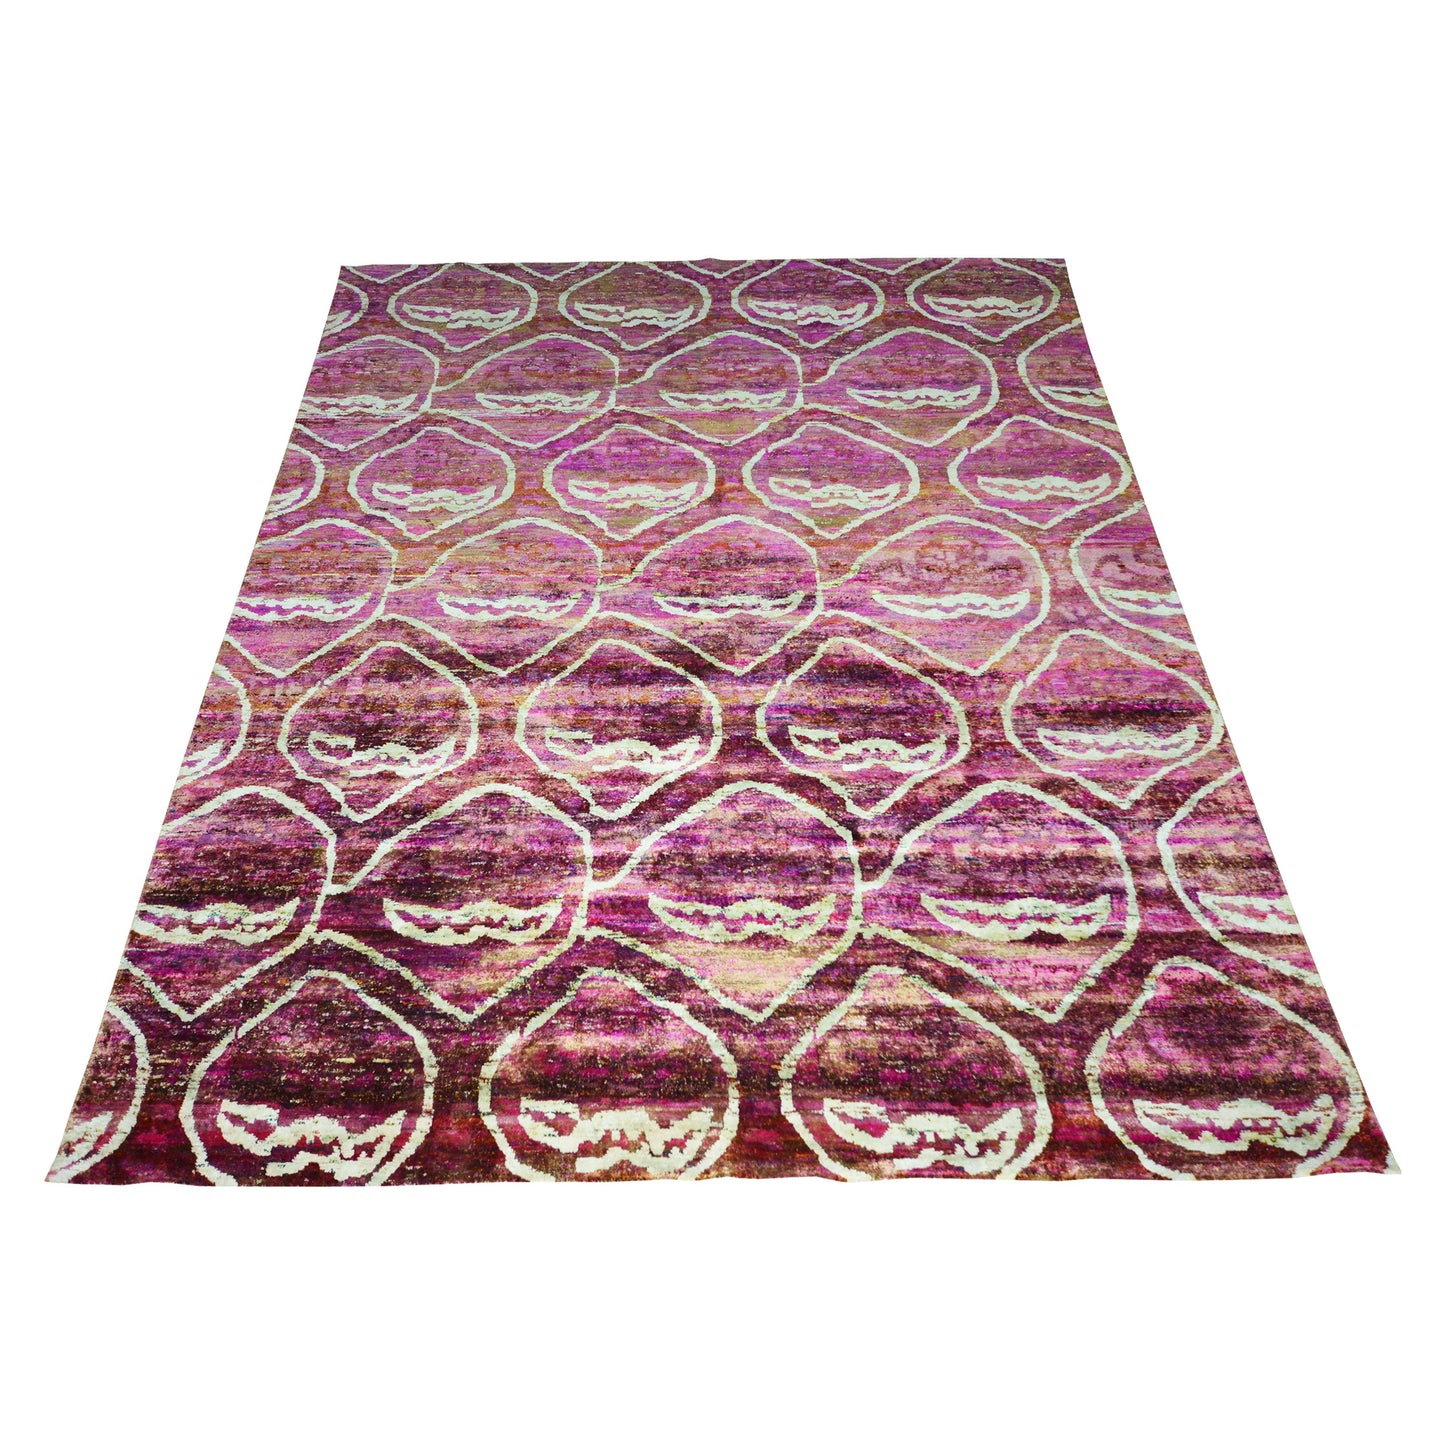 Get trendy with Rose Pink and Ivory Pure Sari Silk Contemporary Damask Handknotted Area Rug - Contemporary Rugs available at Jaipur Oriental Rugs. Grab yours for $5400.00 today!